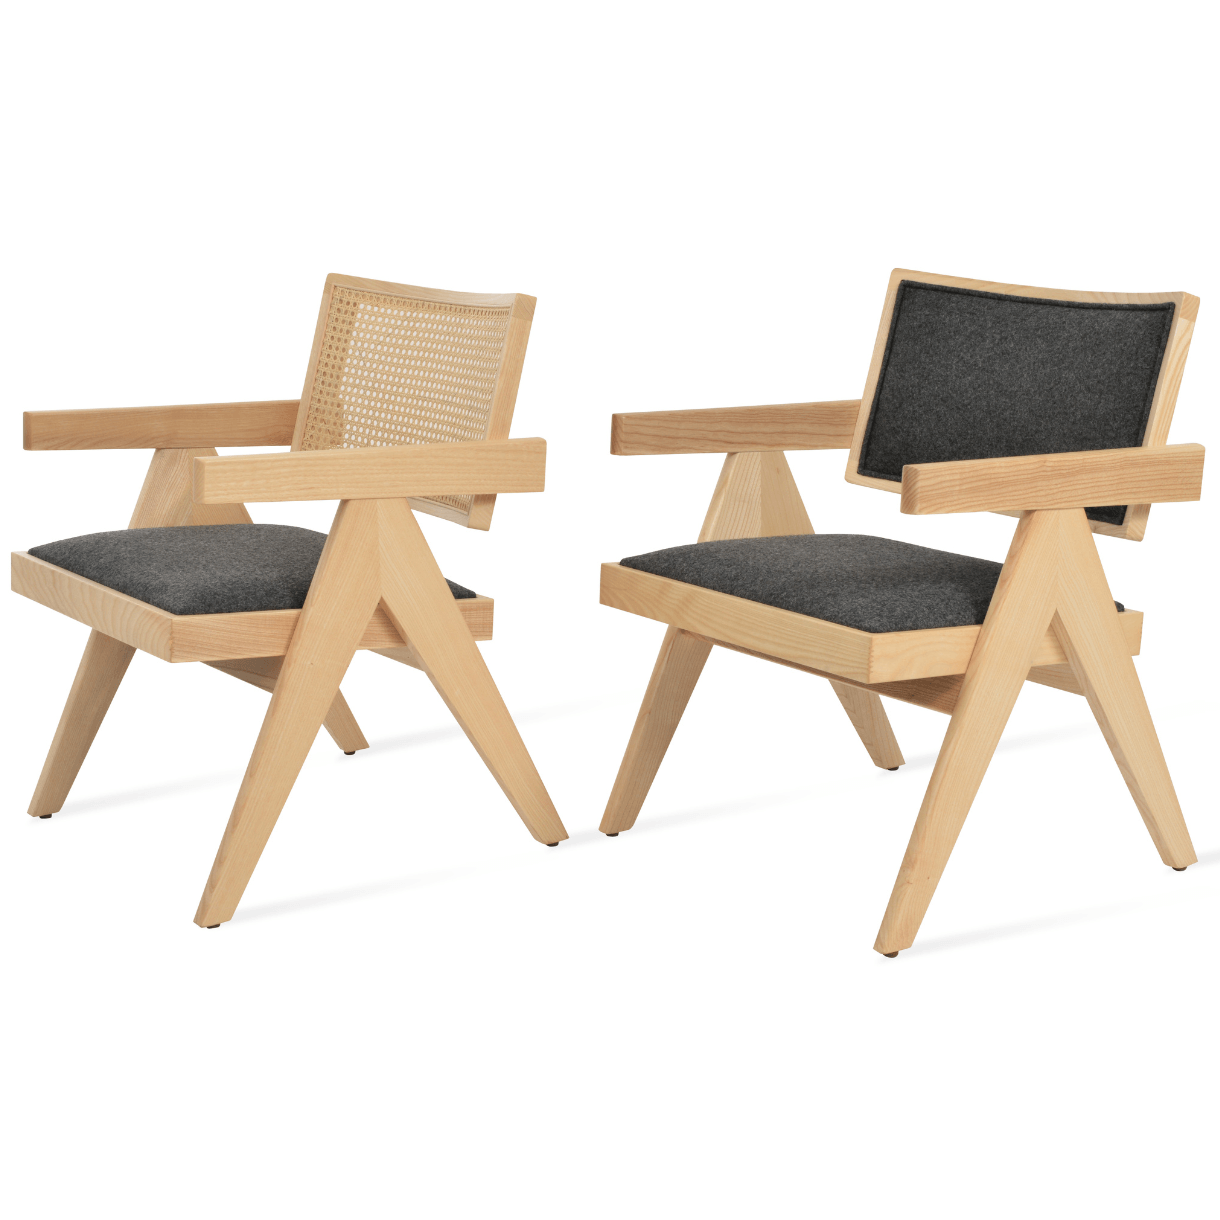 Cane Chairs Pierre J Natural Rattan Lounge Chairs - Your Bar Stools Canada